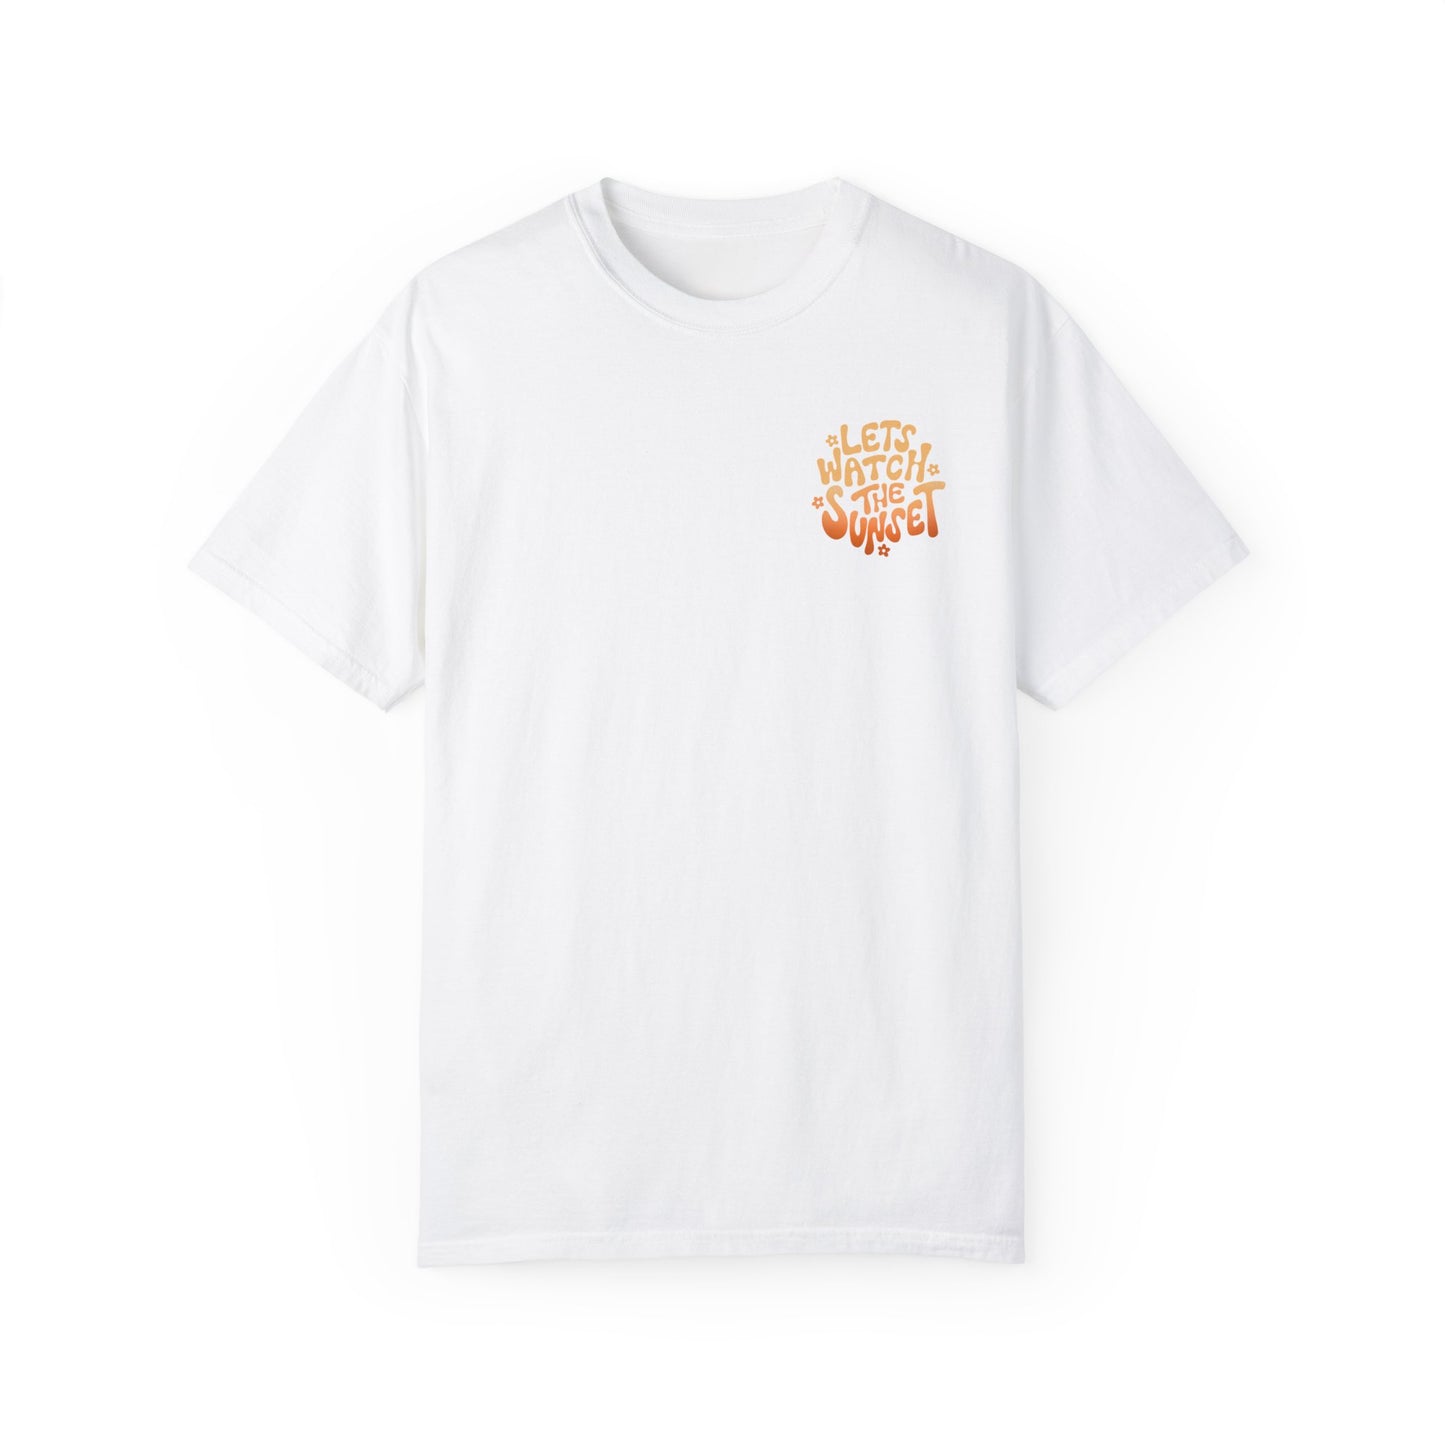 Let's Watch the Sunset Tee - White